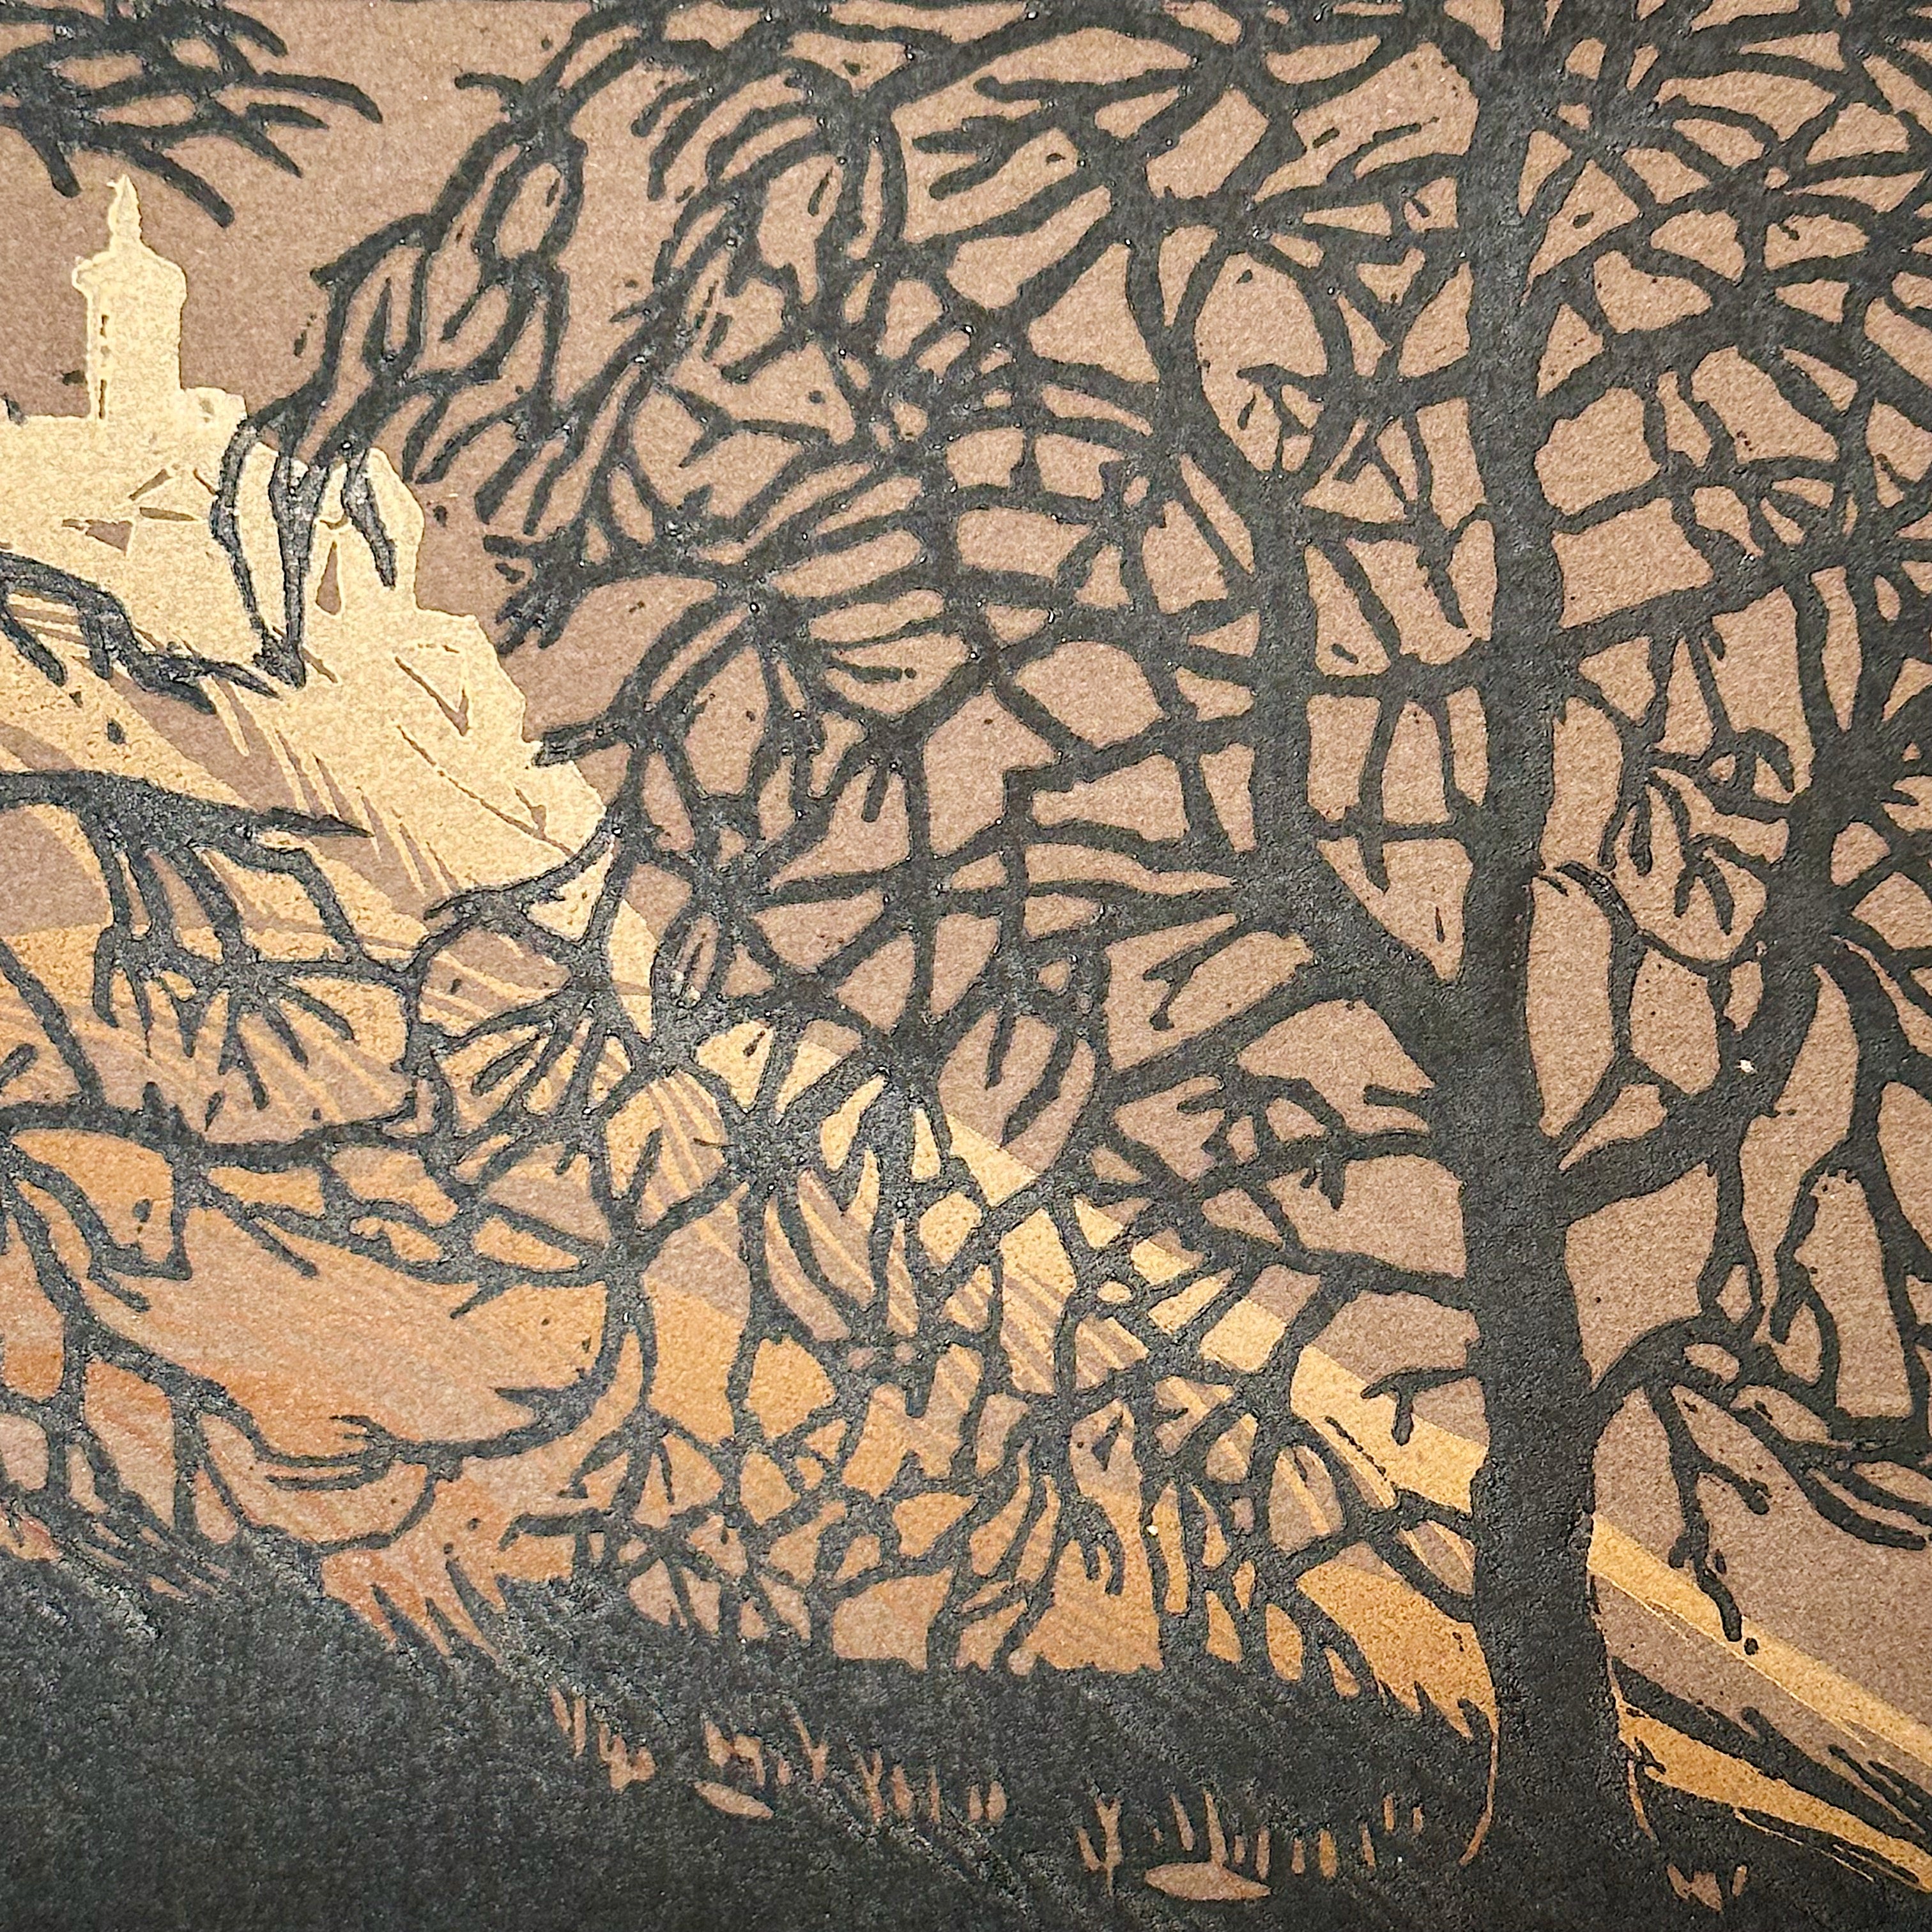 1920s Linocut Mixed Media Artwork of Castle in the Hills | California